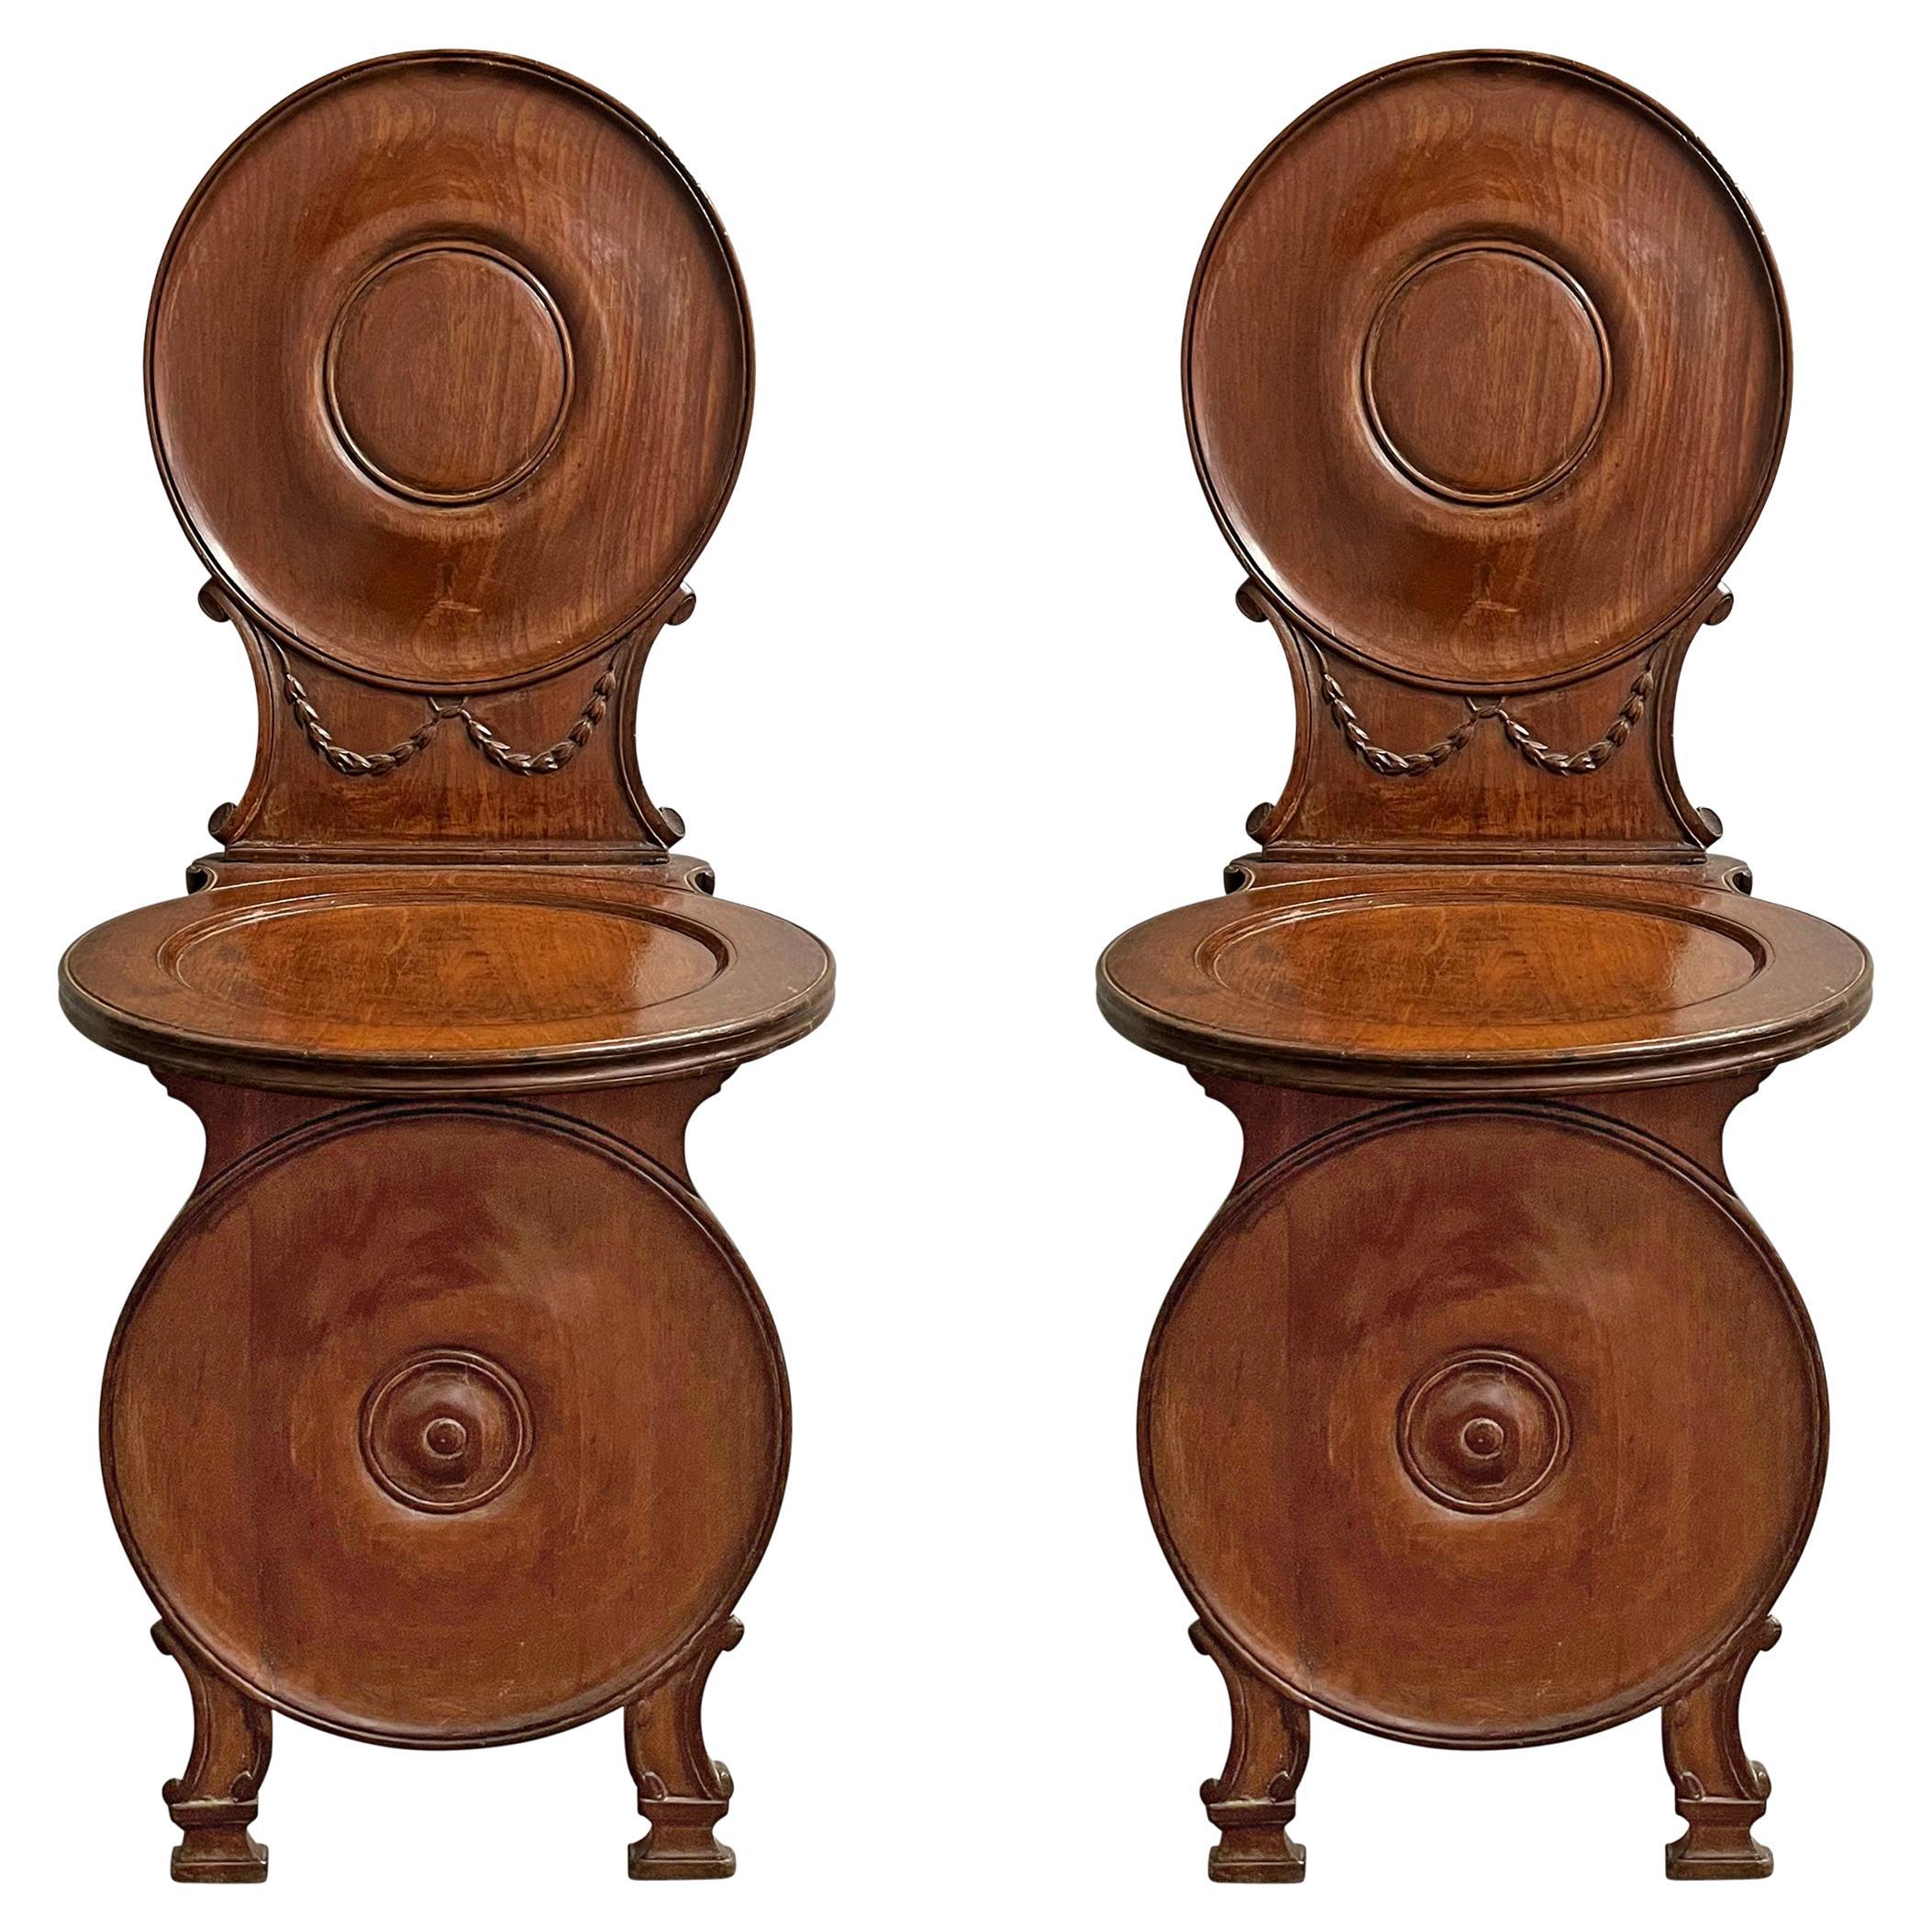 Pair of Early 19th Century Italian Hall Chairs